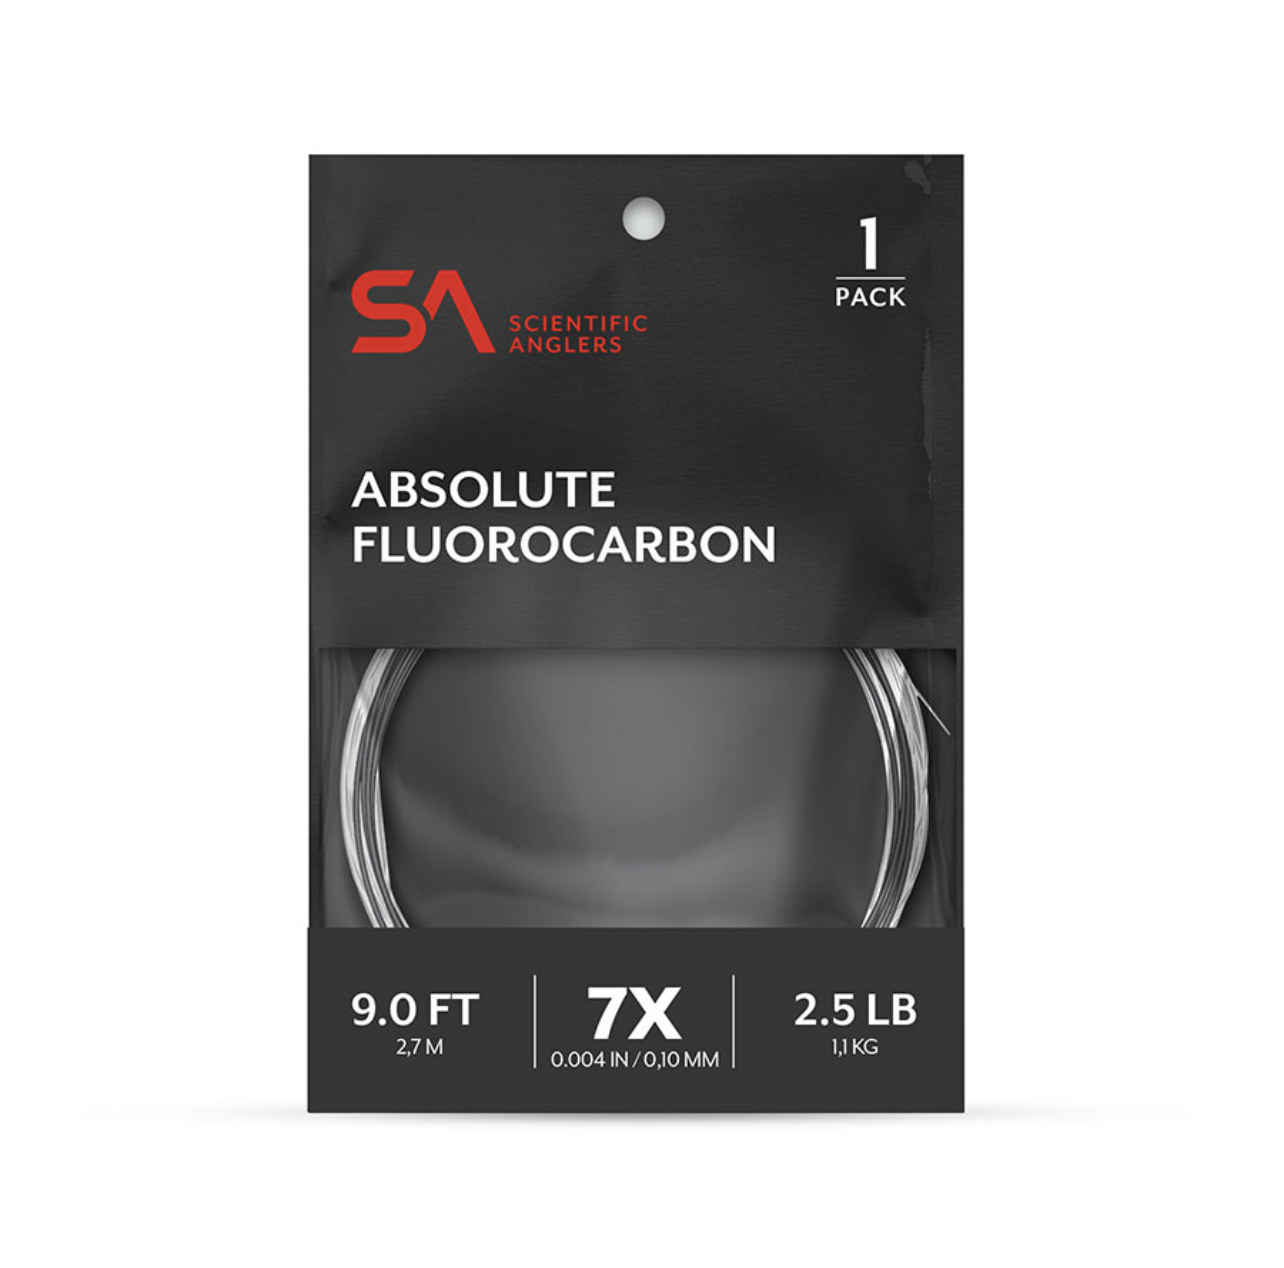 Scientific Anglers Absolute Fluorocarbon Leader - 12ft - 12lb